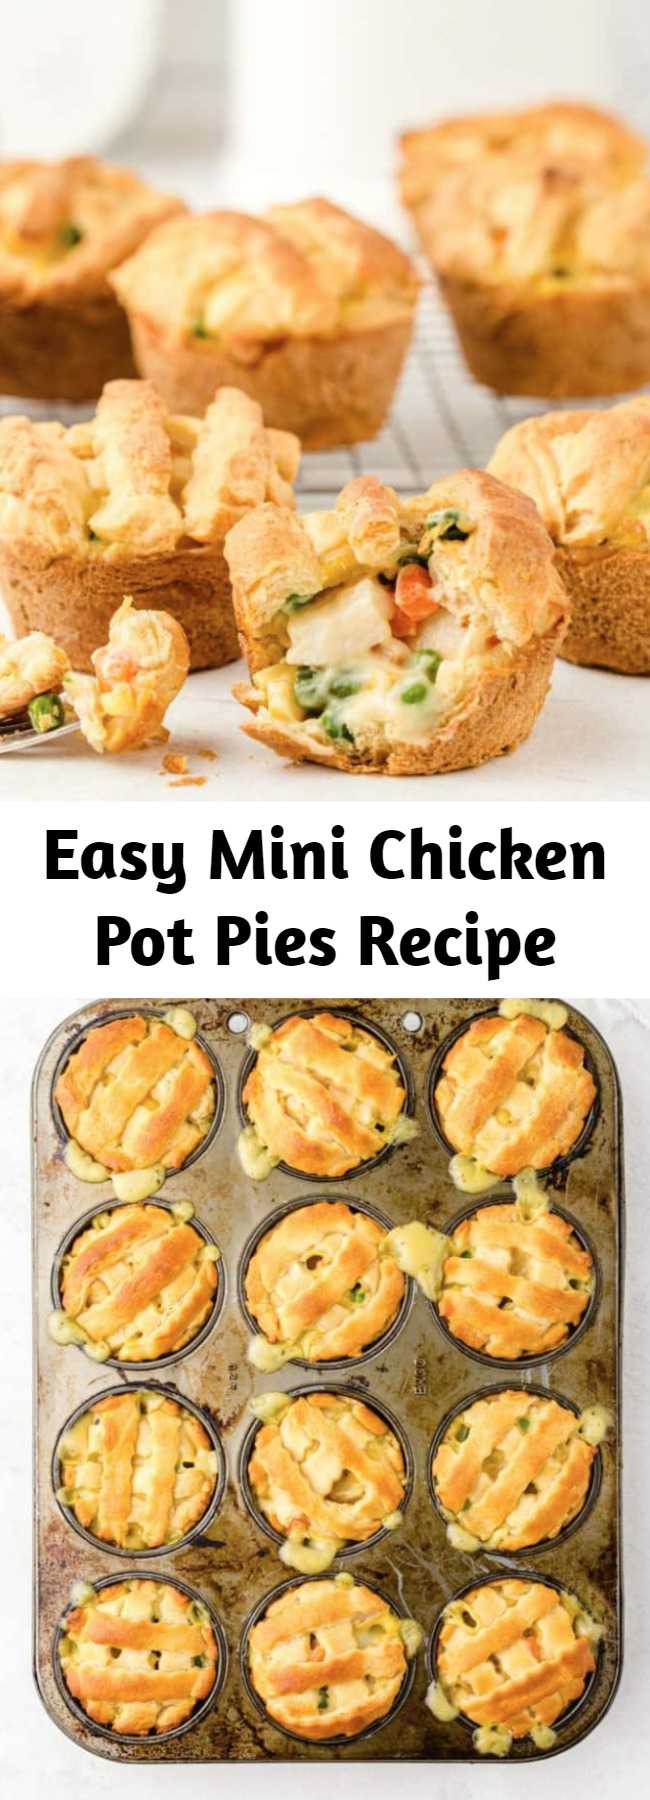 Easy Mini Chicken Pot Pies Recipe - These Mini-Chicken Pot Pies are the perfect comfort food! Perfectly portioned, only need 5-ingredients and they can be ready in just about 30 minutes. Serve them as a delicious bite-sized appetizer or pair them with a small salad for a fun and easy family dinner!